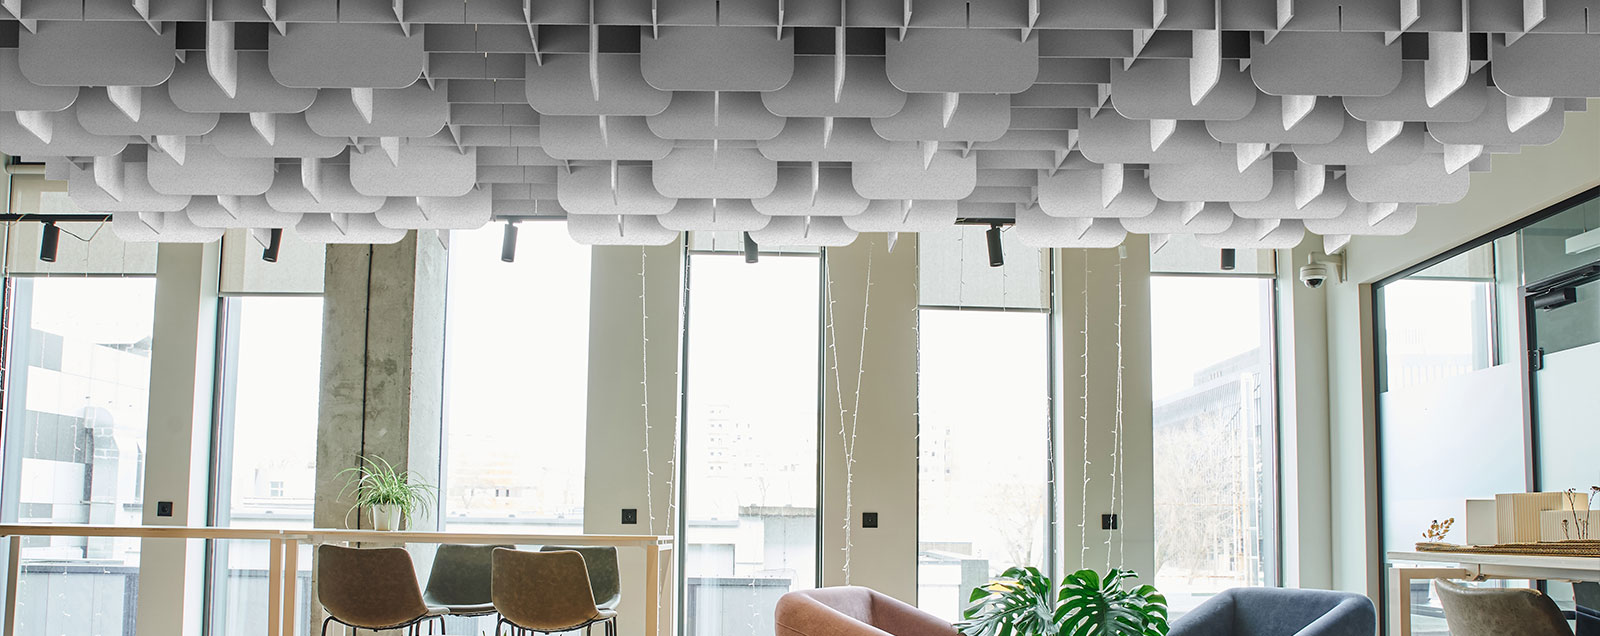 14six8 Blog Header How Can a Suspended Ceiling Improve Room Acoustics